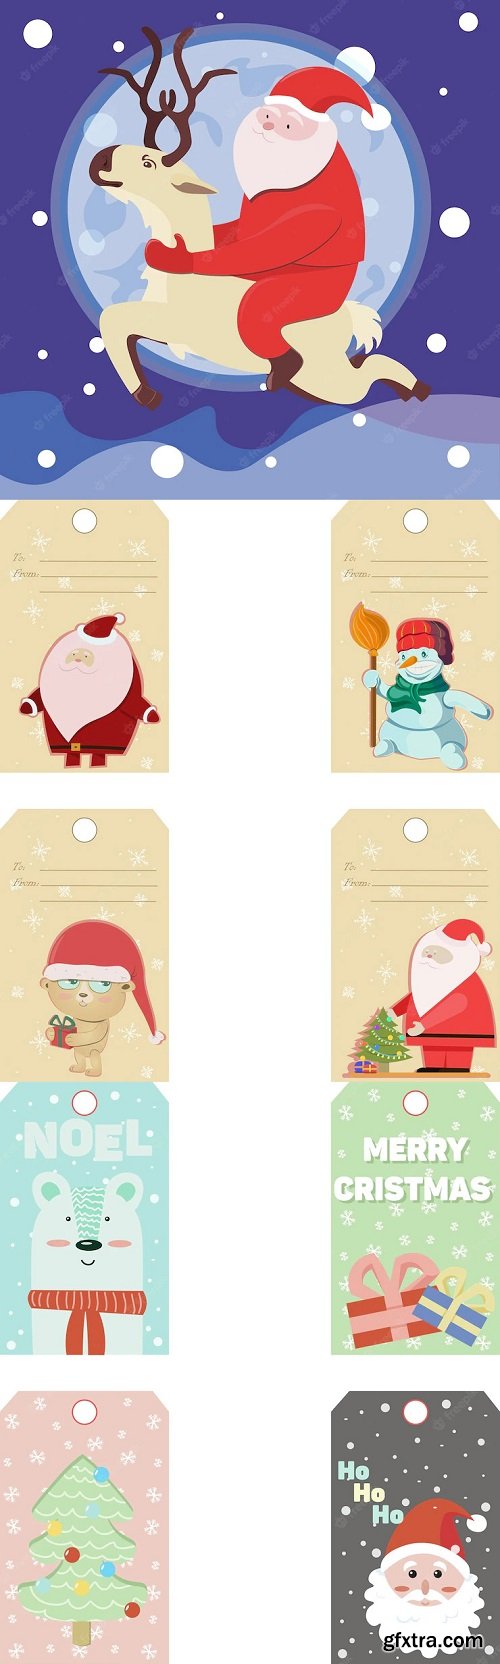 New year and christmas cards with santa, snowman and bear with gifts